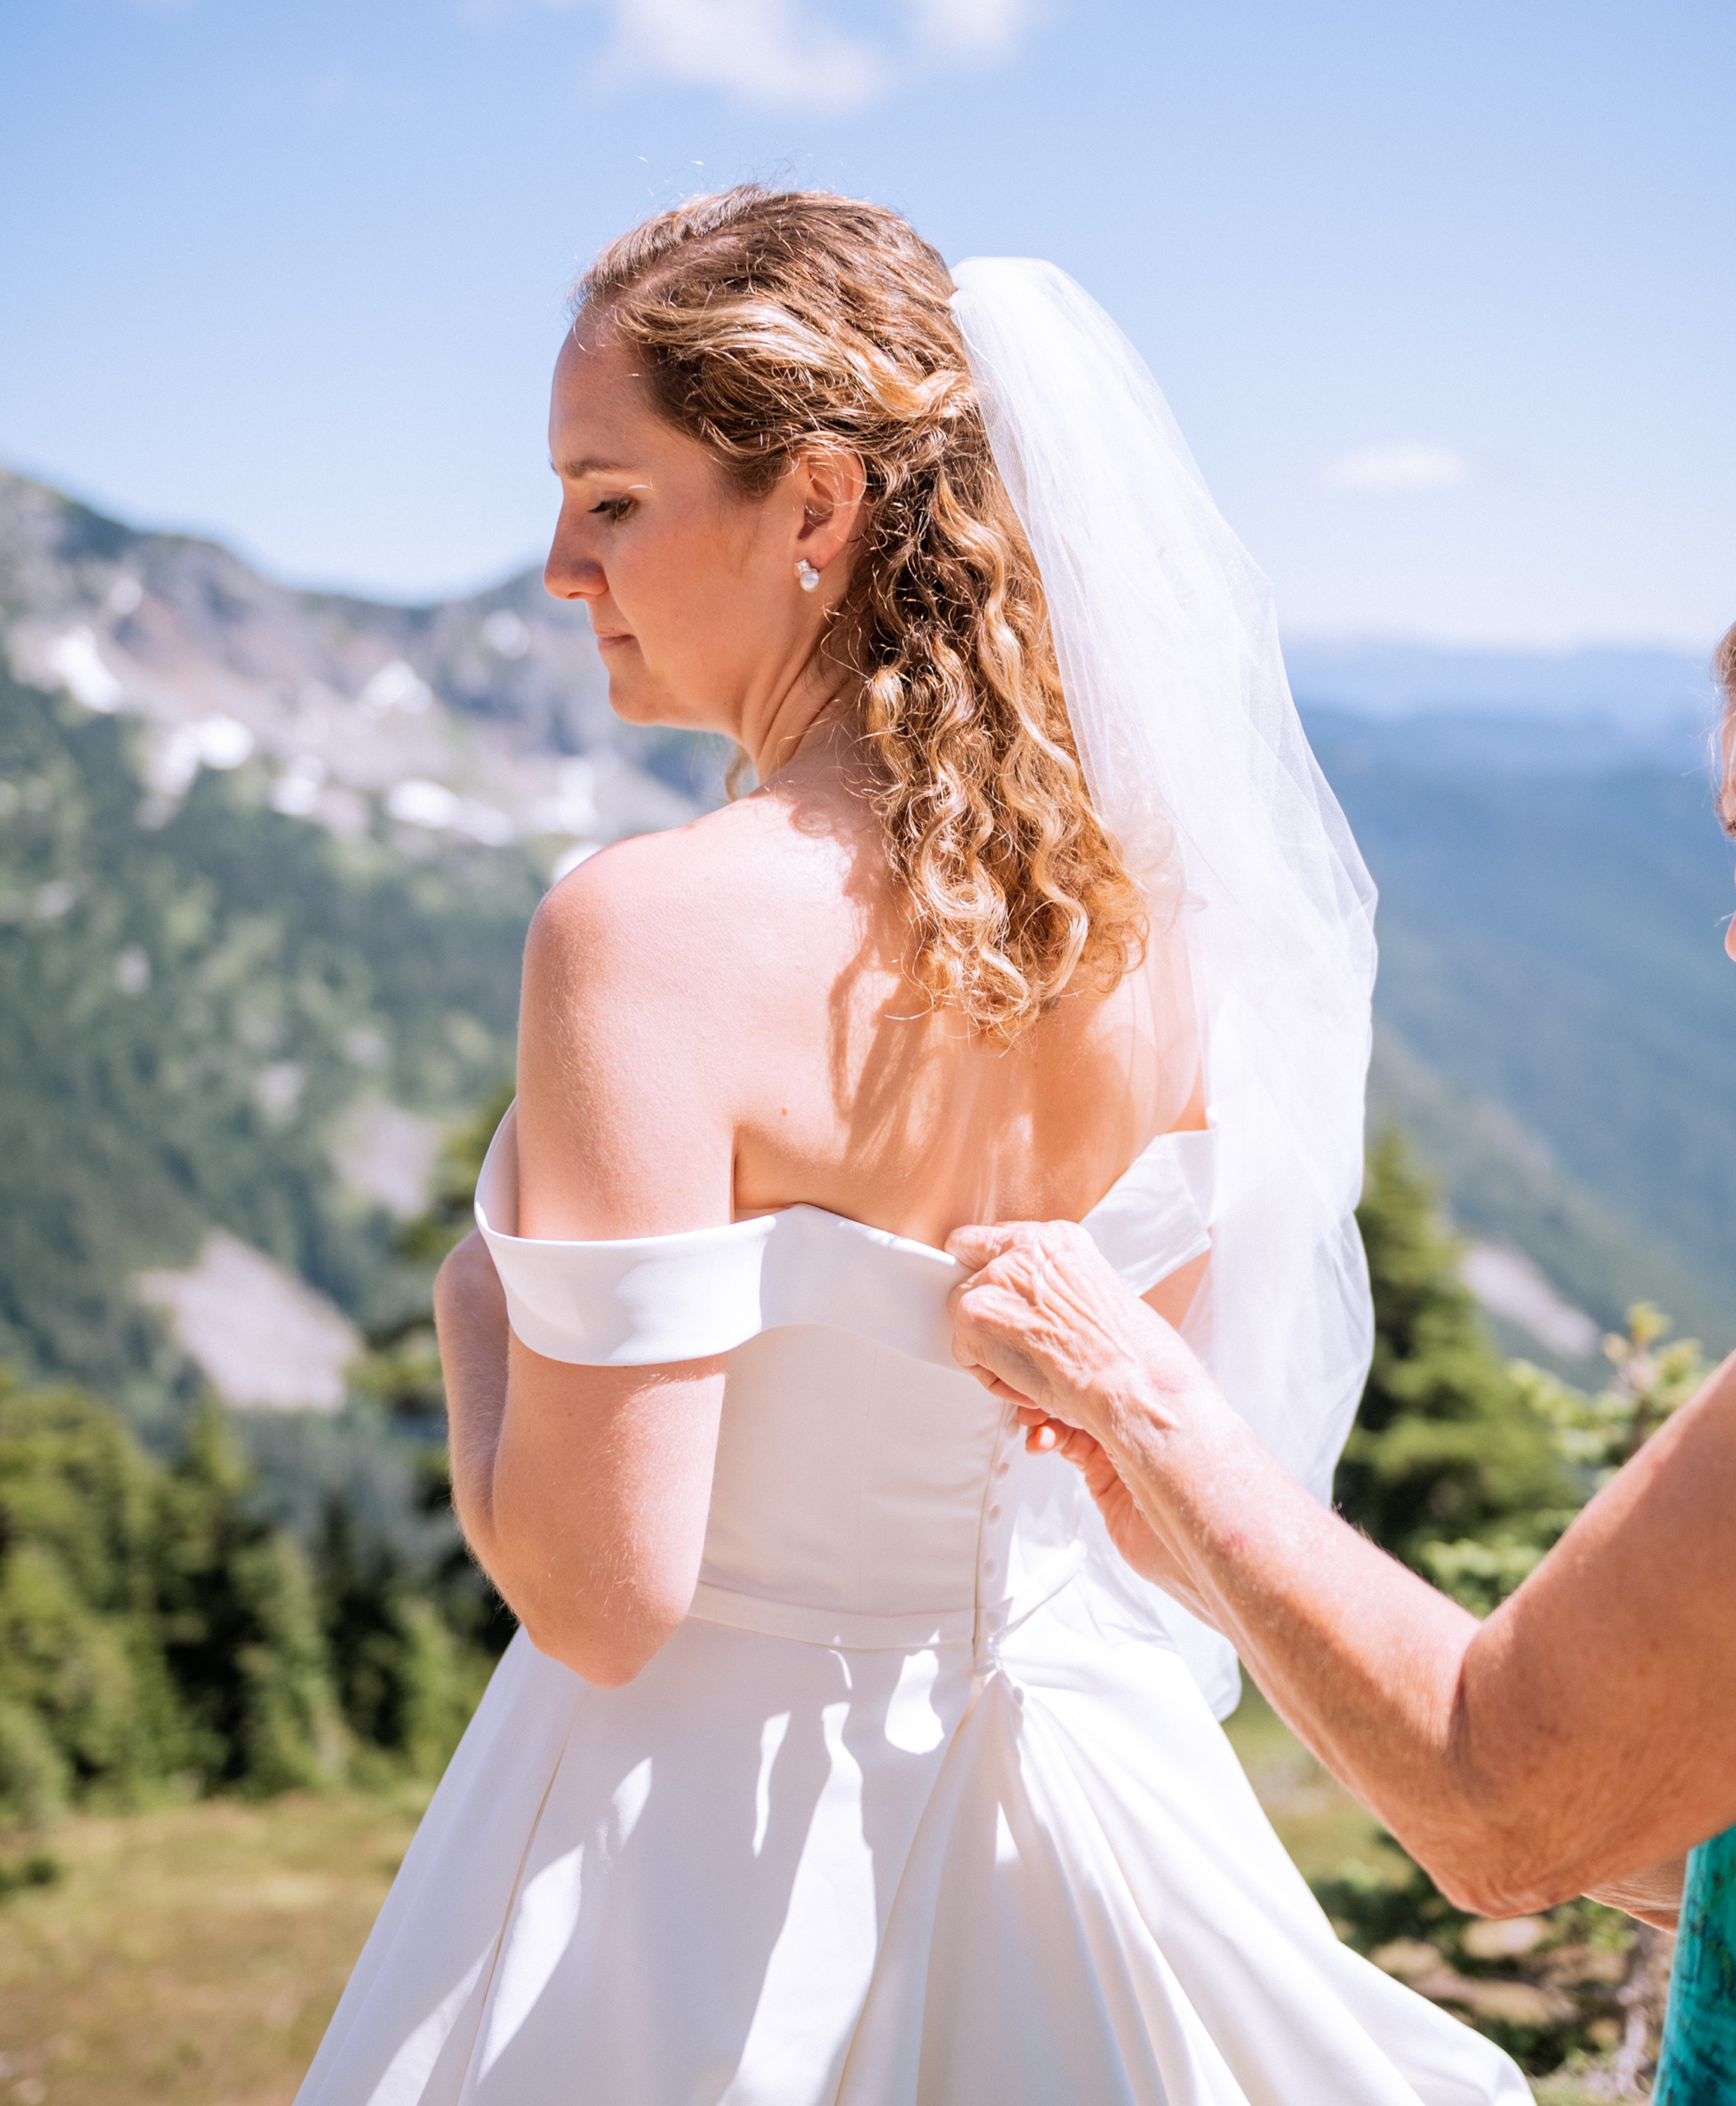 bride looking off into the distance while mother helps her finish getting ready for elopement ceremony